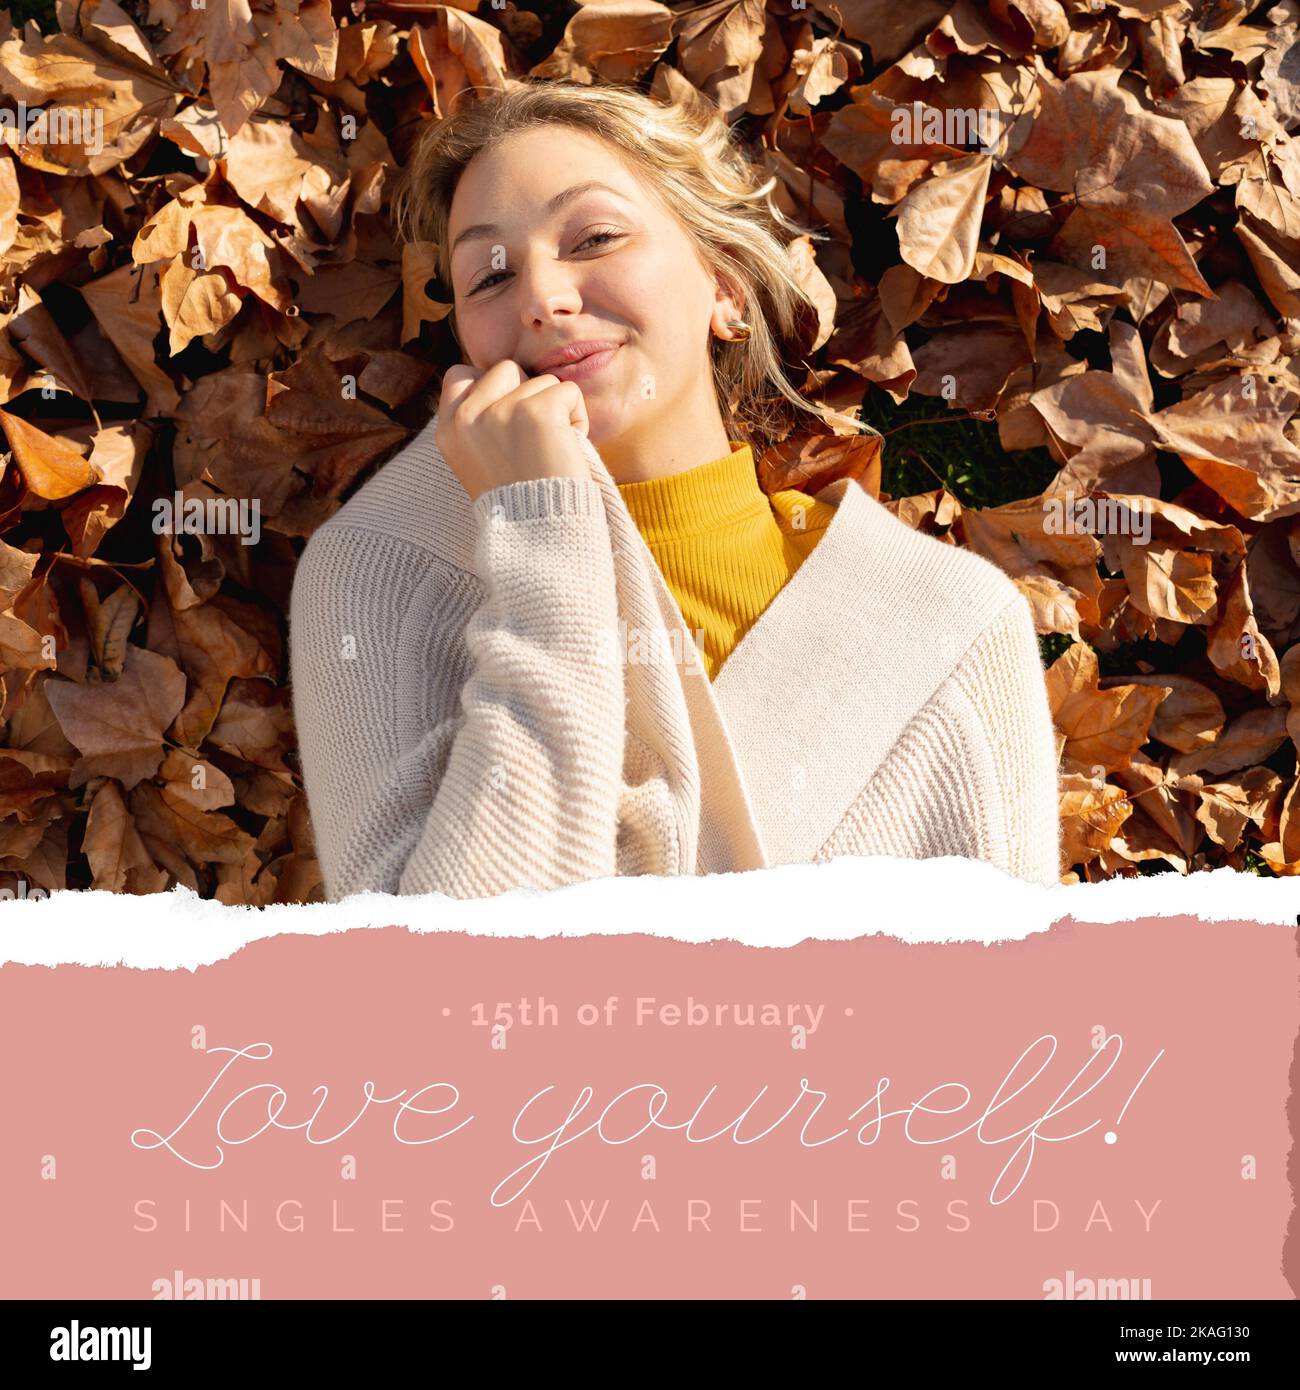 Composition of singles awareness day text and smiling caucasian woman lying on leafy background Stock Photo